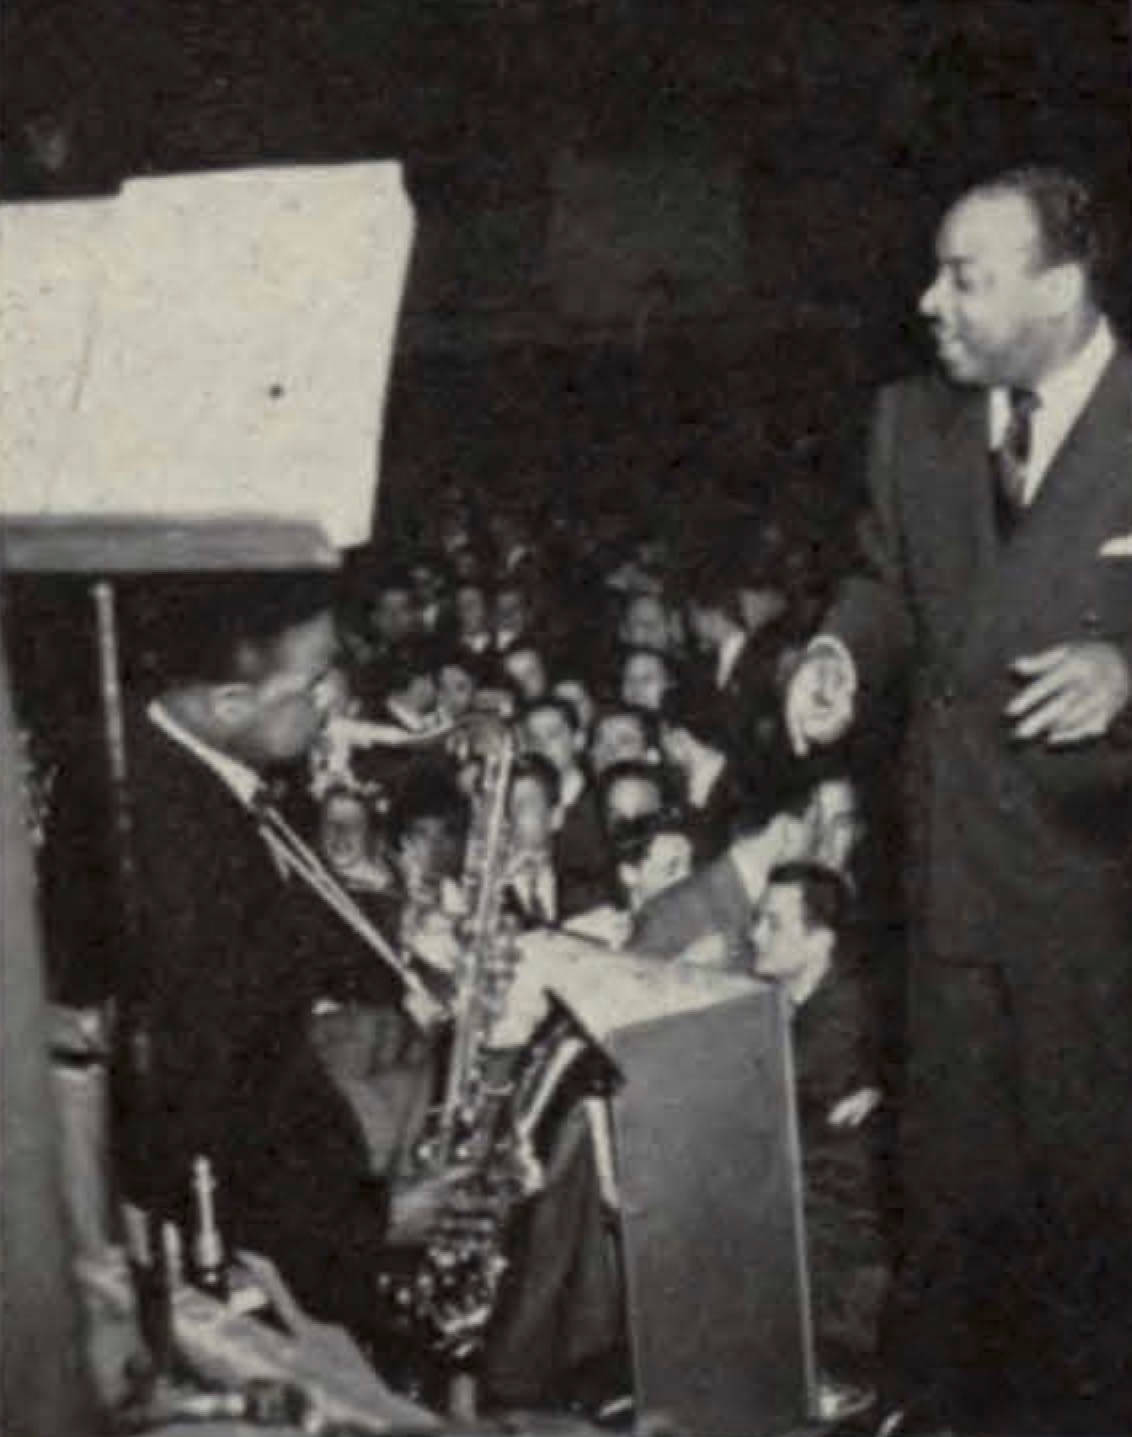 Count Basie and Lester Young Classic Wallpaper